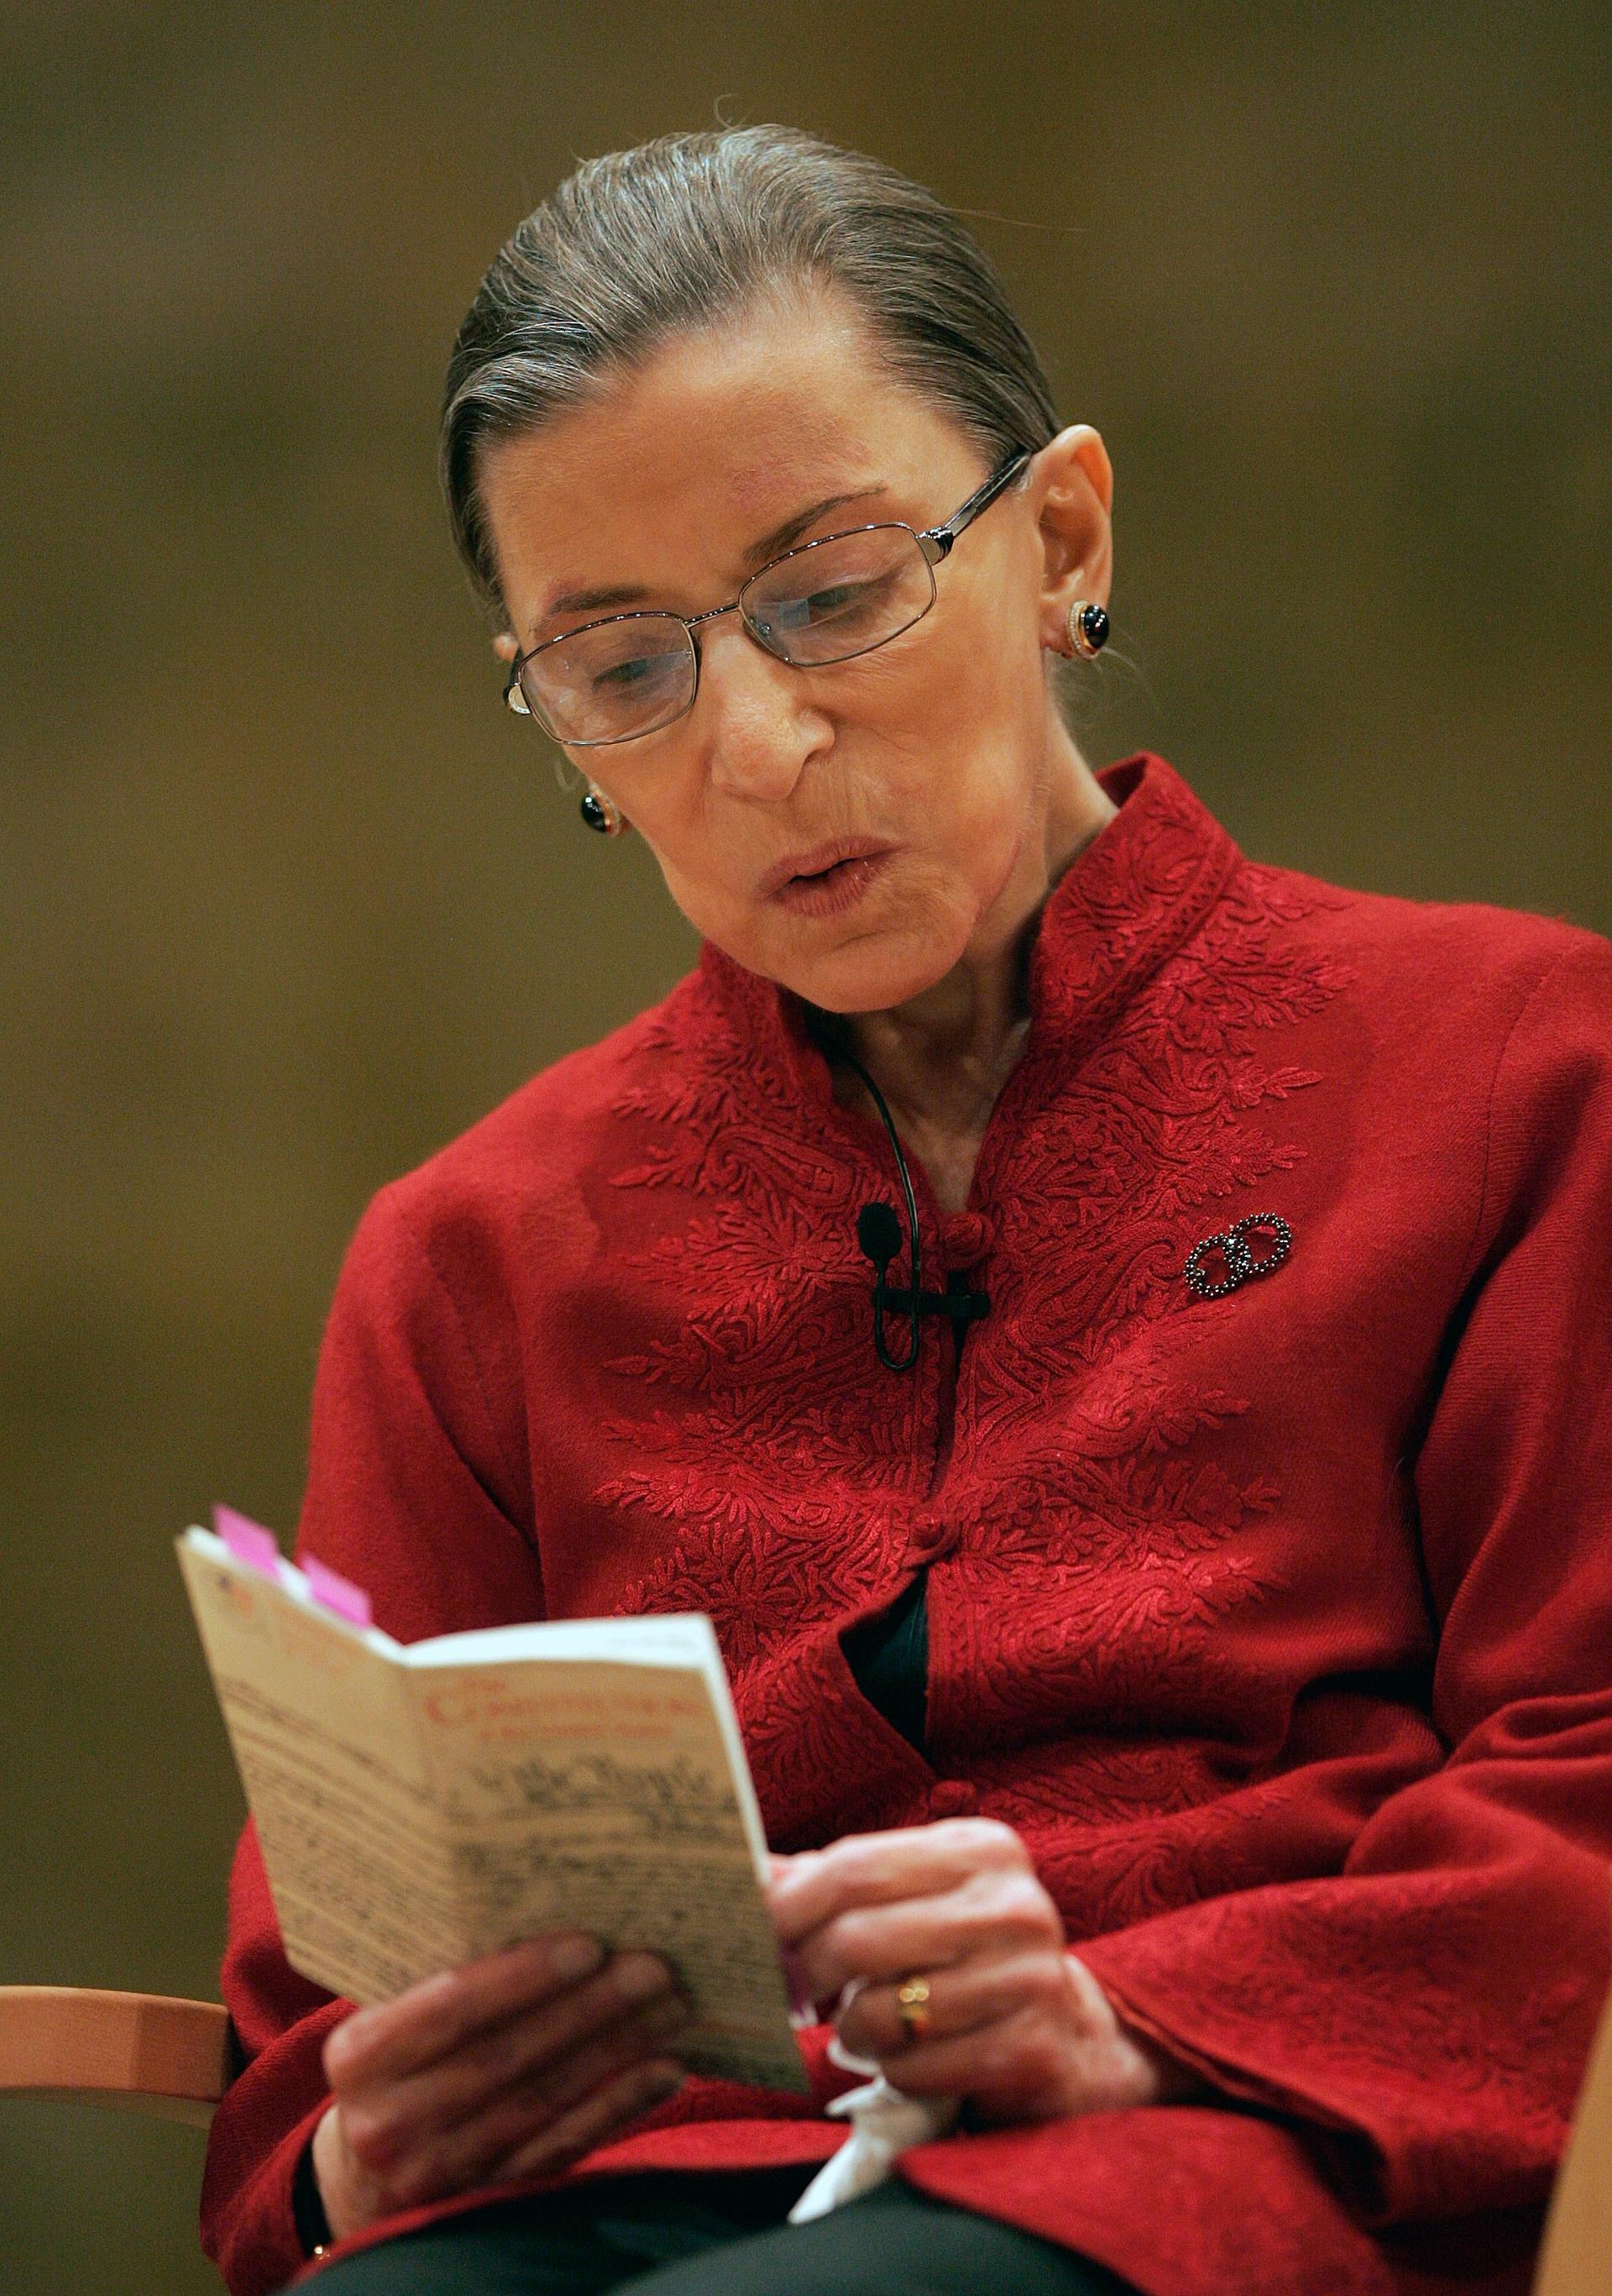 Supreme Court Justice Ruth Bader Ginsburg reads from a small book form of the U.S. Constitution while talking about constitutional law on 23 October 2008 in Princeton, NJ AP Photo/Mel Evans